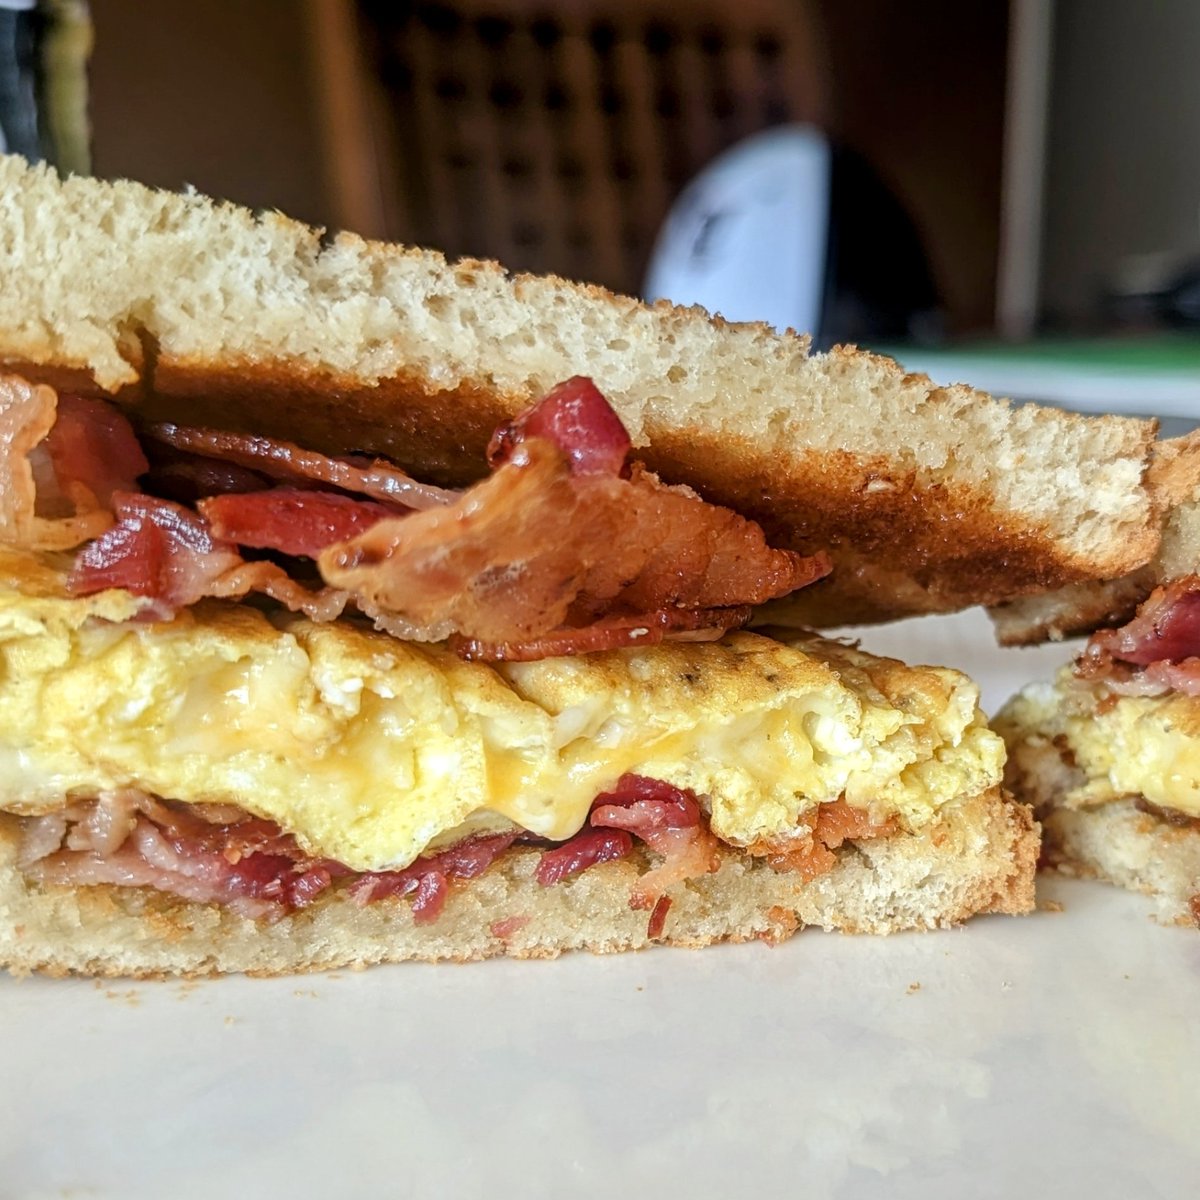 Do love a good breakfast sandwich! Double bacon with cheesey eggs served between toast spread with thick butter. Simple yet delicious!

#sandwich #bacon #baconandeggs #baconsandwich #butteredtoast #breakfast #breakfastsandwich #cheeseyeggs #toastedsandwich #loveagoodsandwich